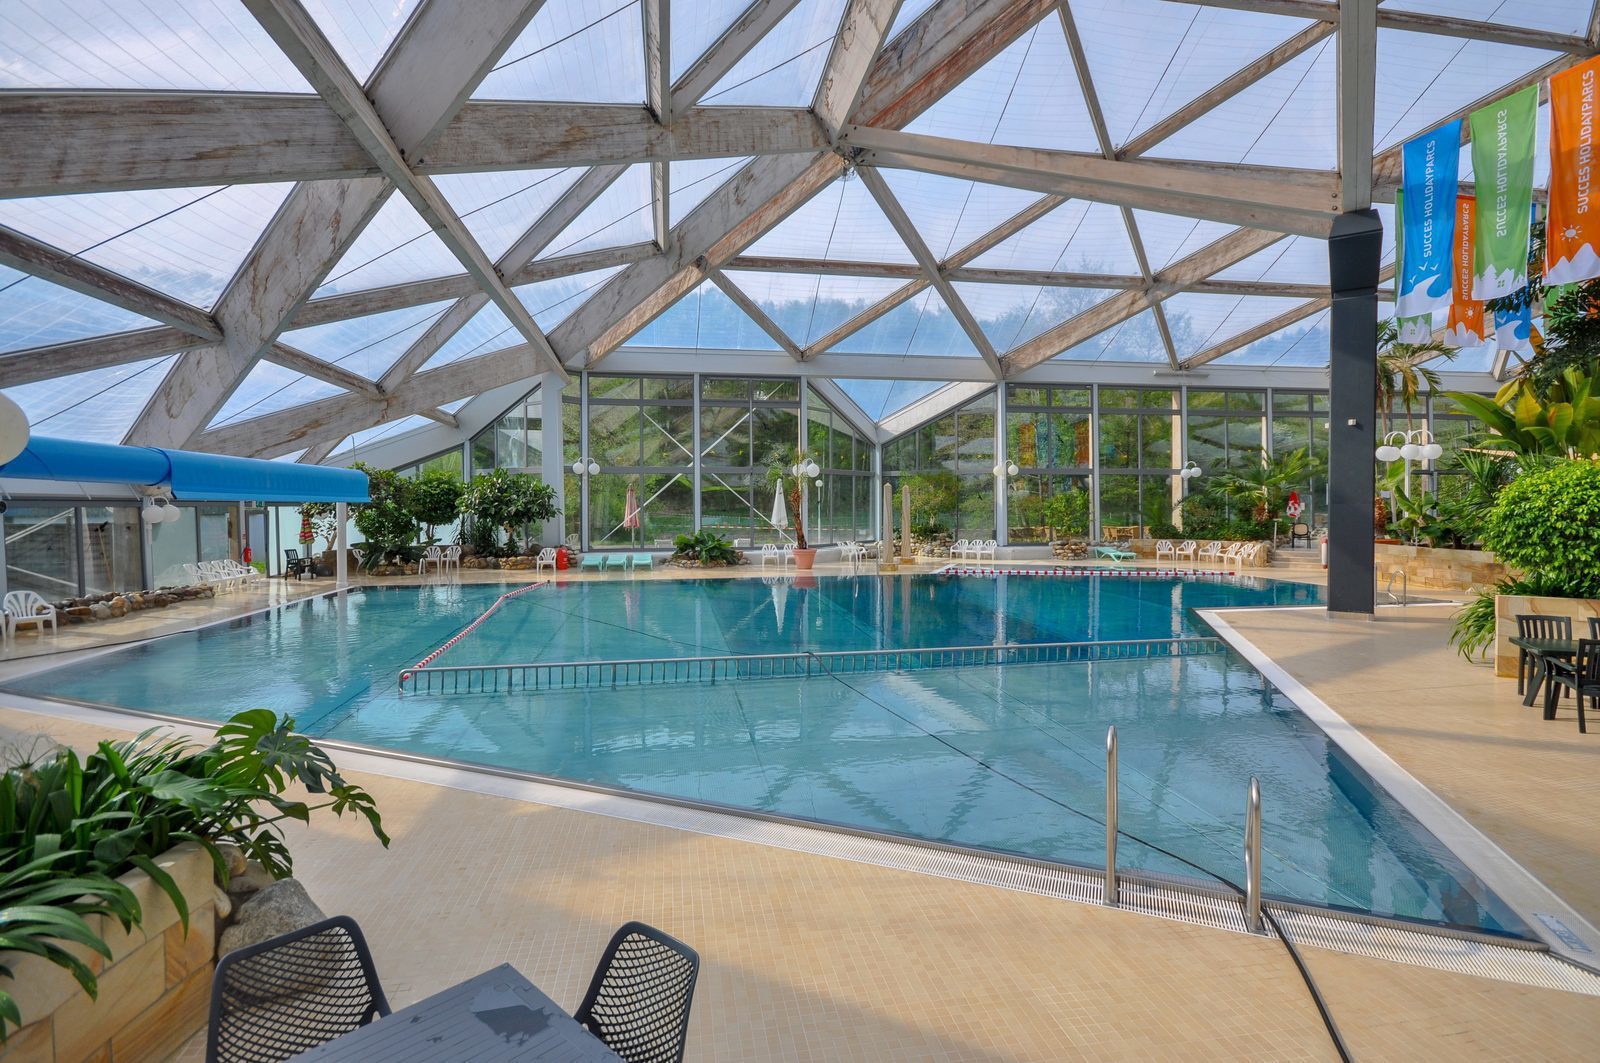 Vacation park in Germany with swimming pool